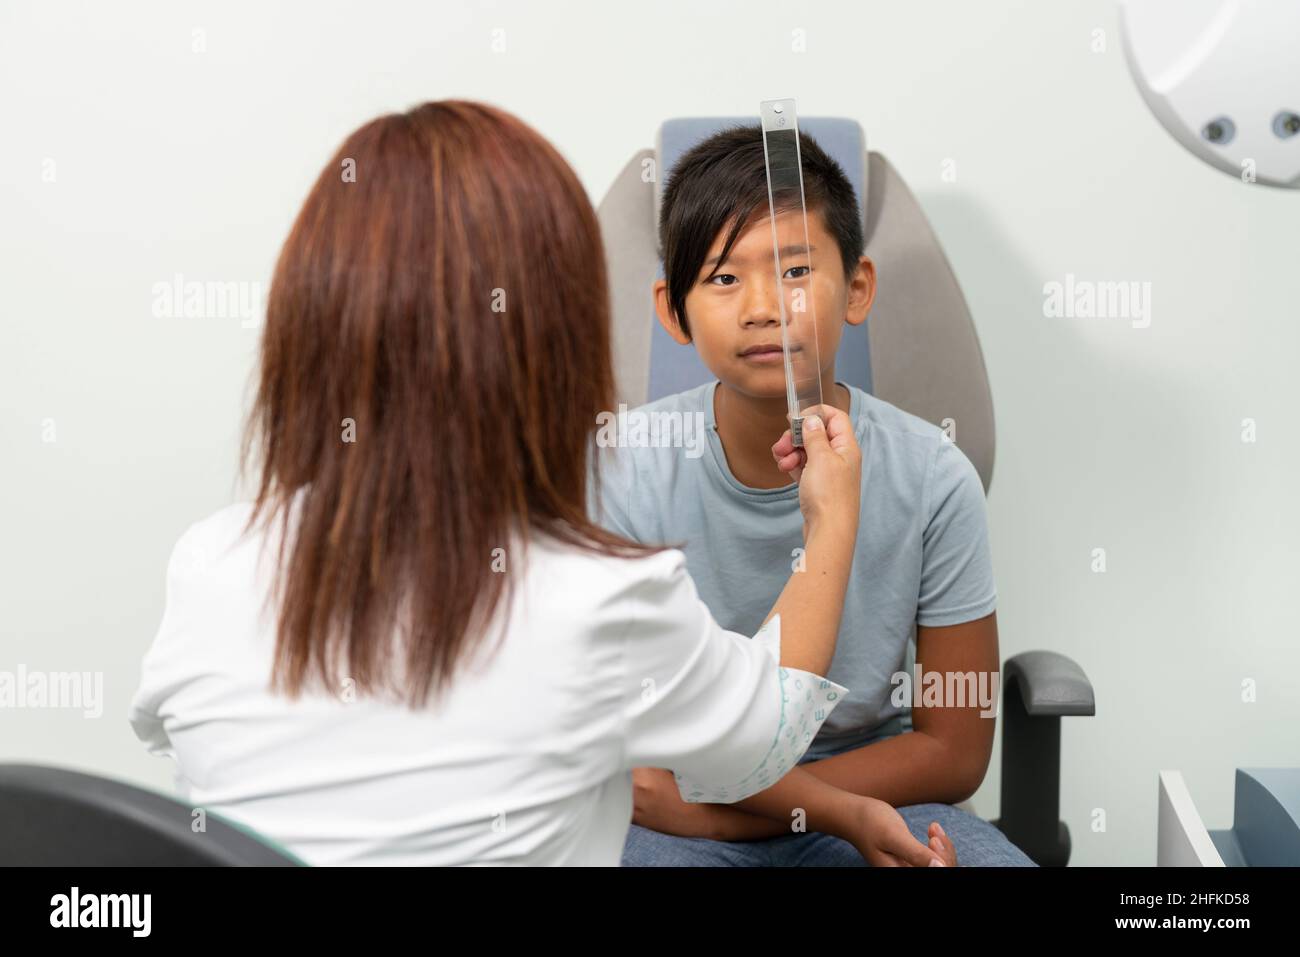 Asian boy in a consultation of an ophthalmologist woman with a prism Stock Photo